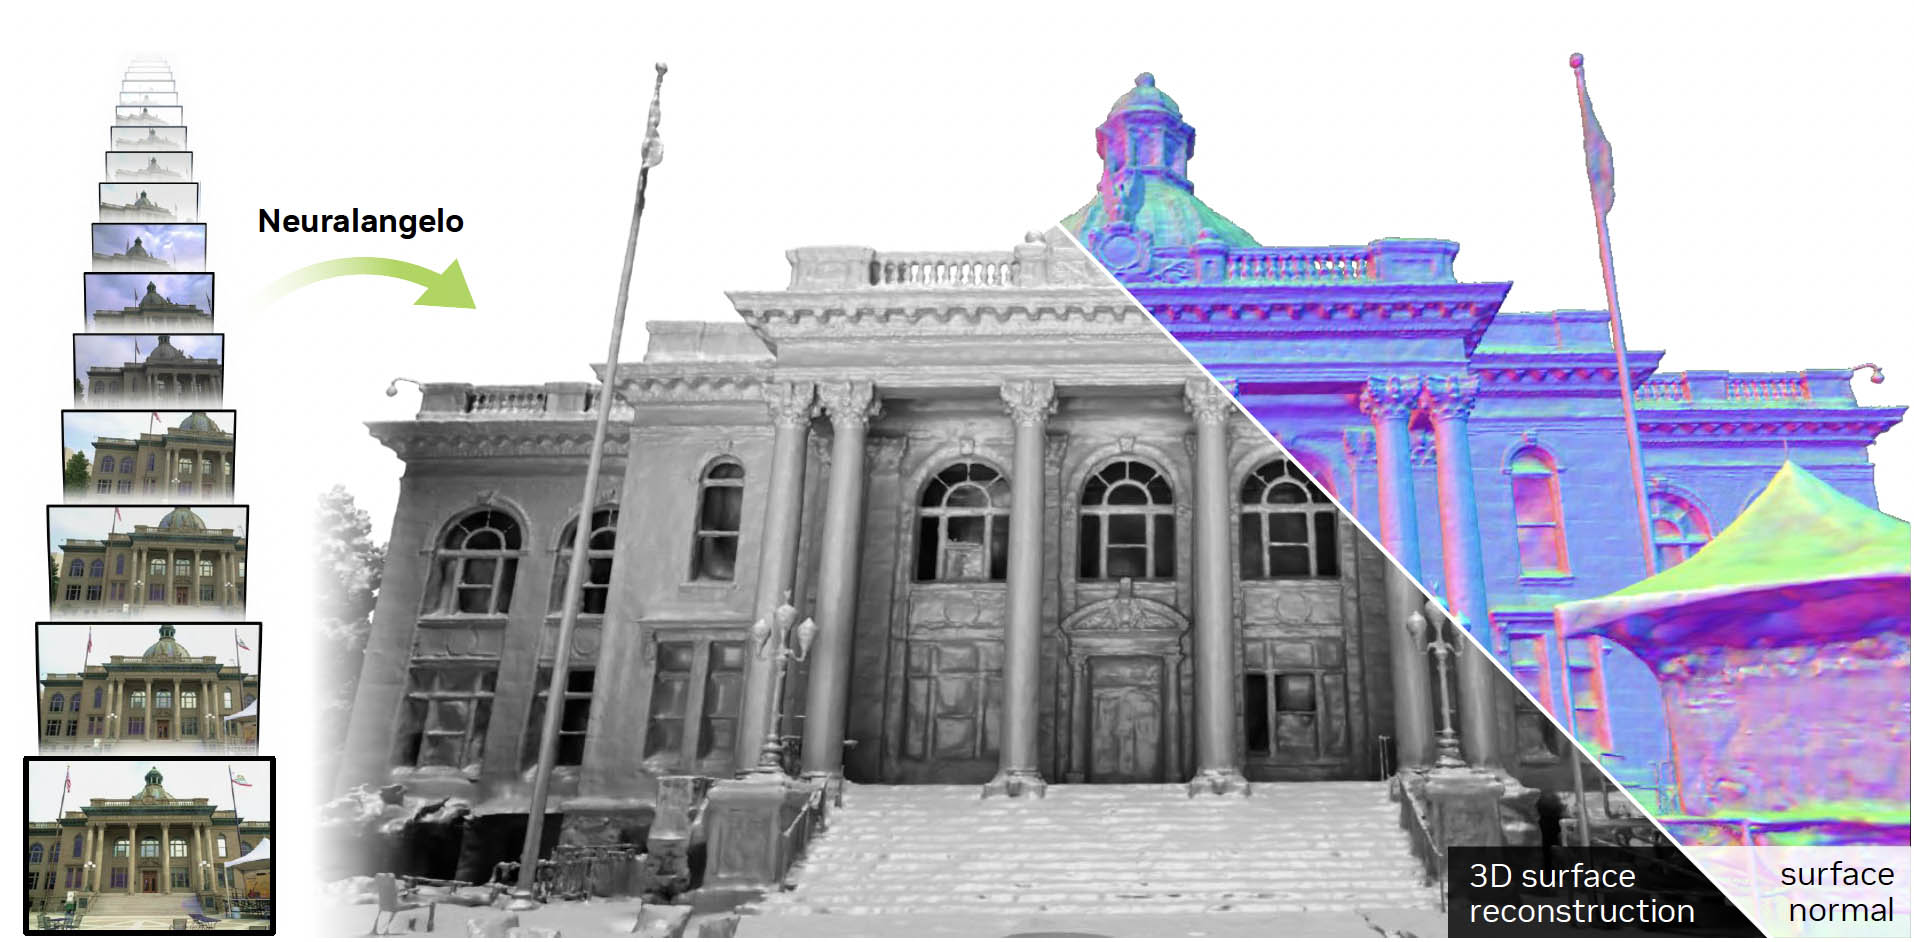 NVIDIA's Neuralangelo can create 3D art and architecture from 2D video clips.